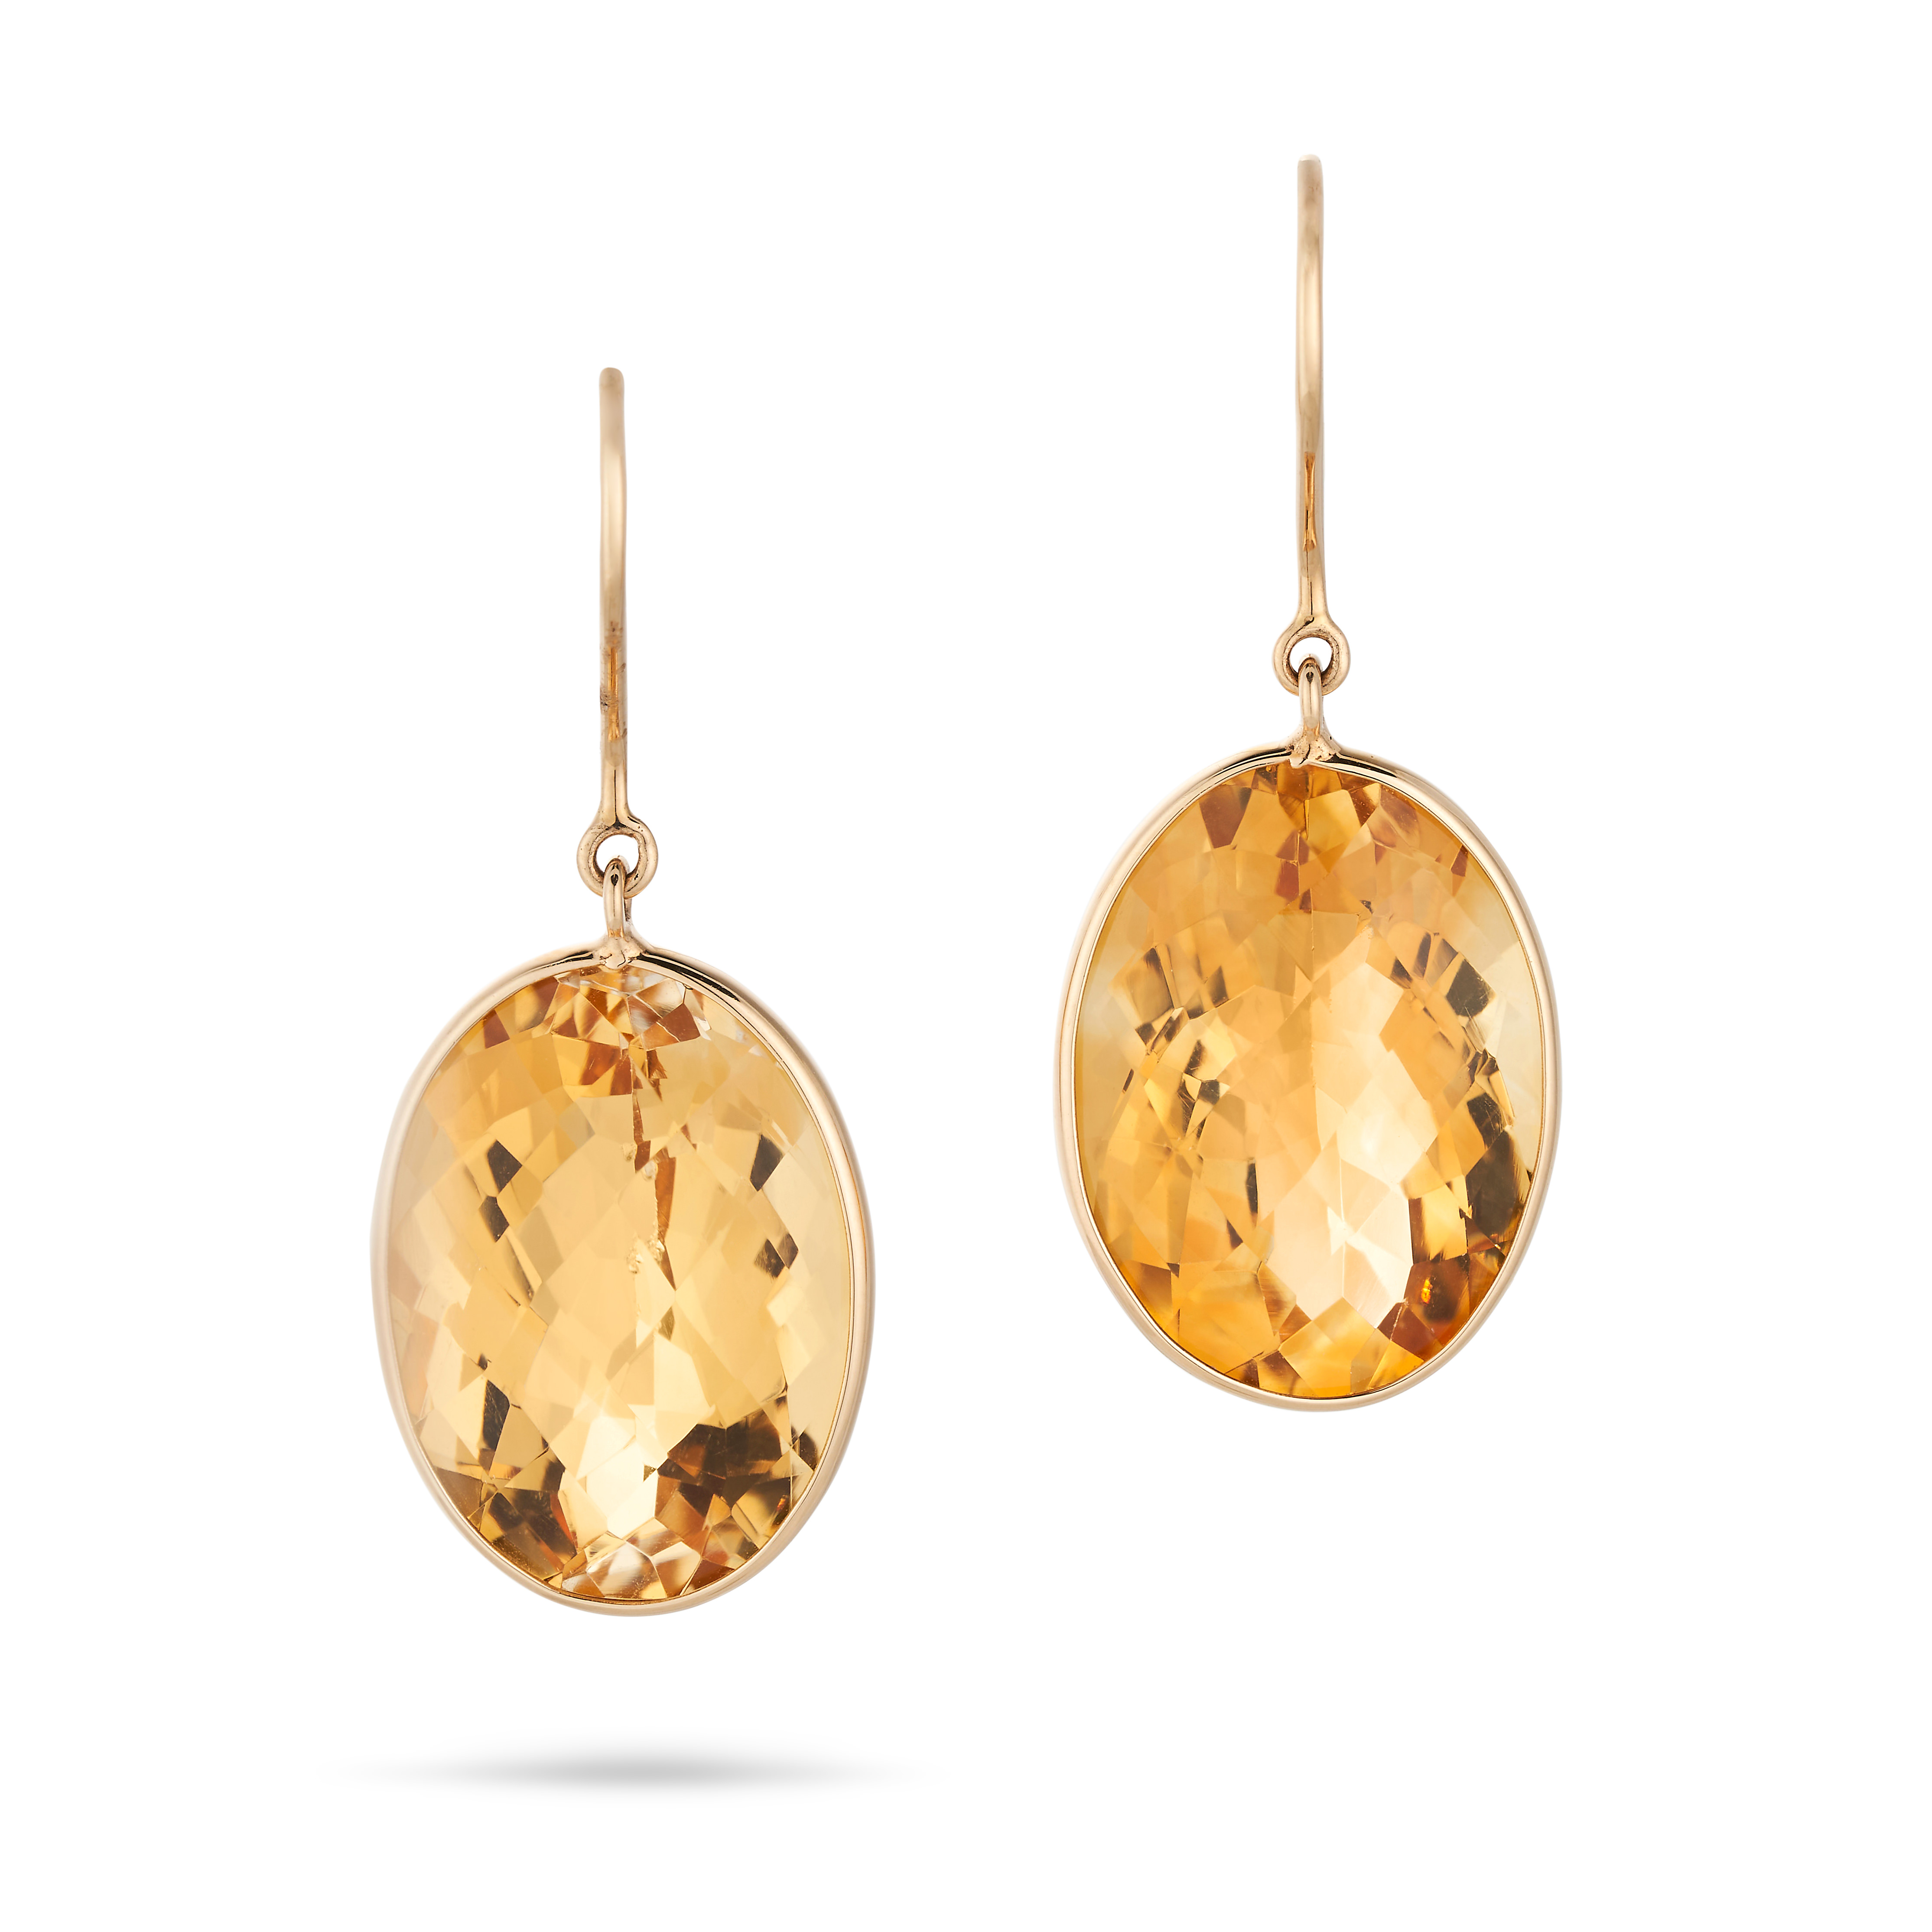 A PAIR OF CITRINE DROP EARRINGS each set with an oval citrine, stamped 14K, 3.2cm, 5.7g.